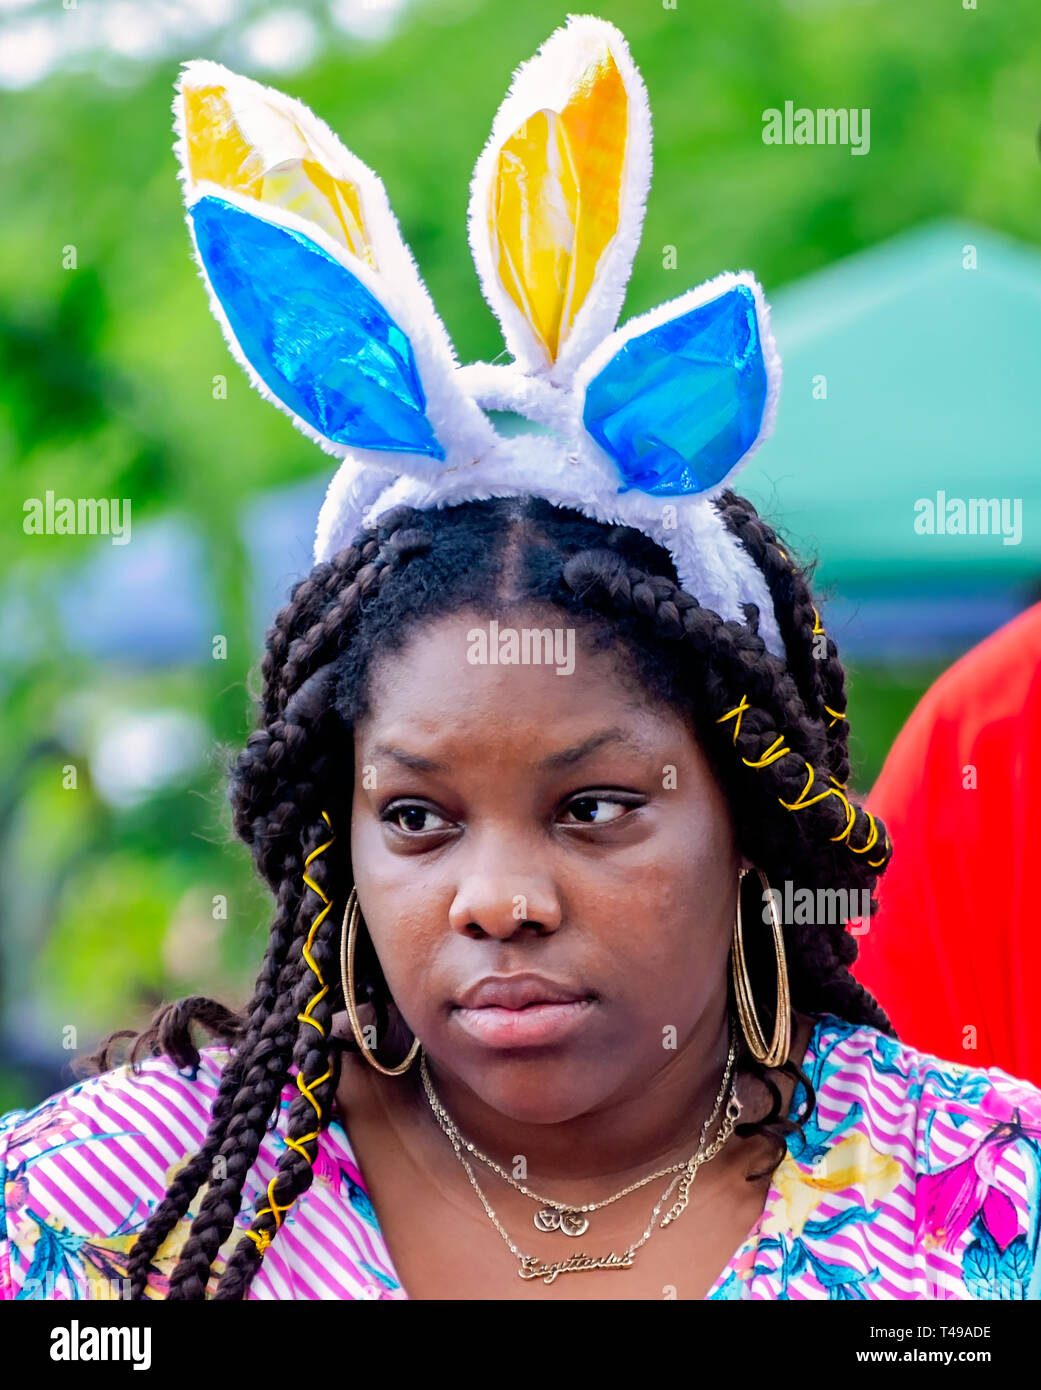 A woman wears bunny ears during a community Easter egg hunt at Langan Park, April 13, 2019, in Mobile, Alabama. Stock Photo